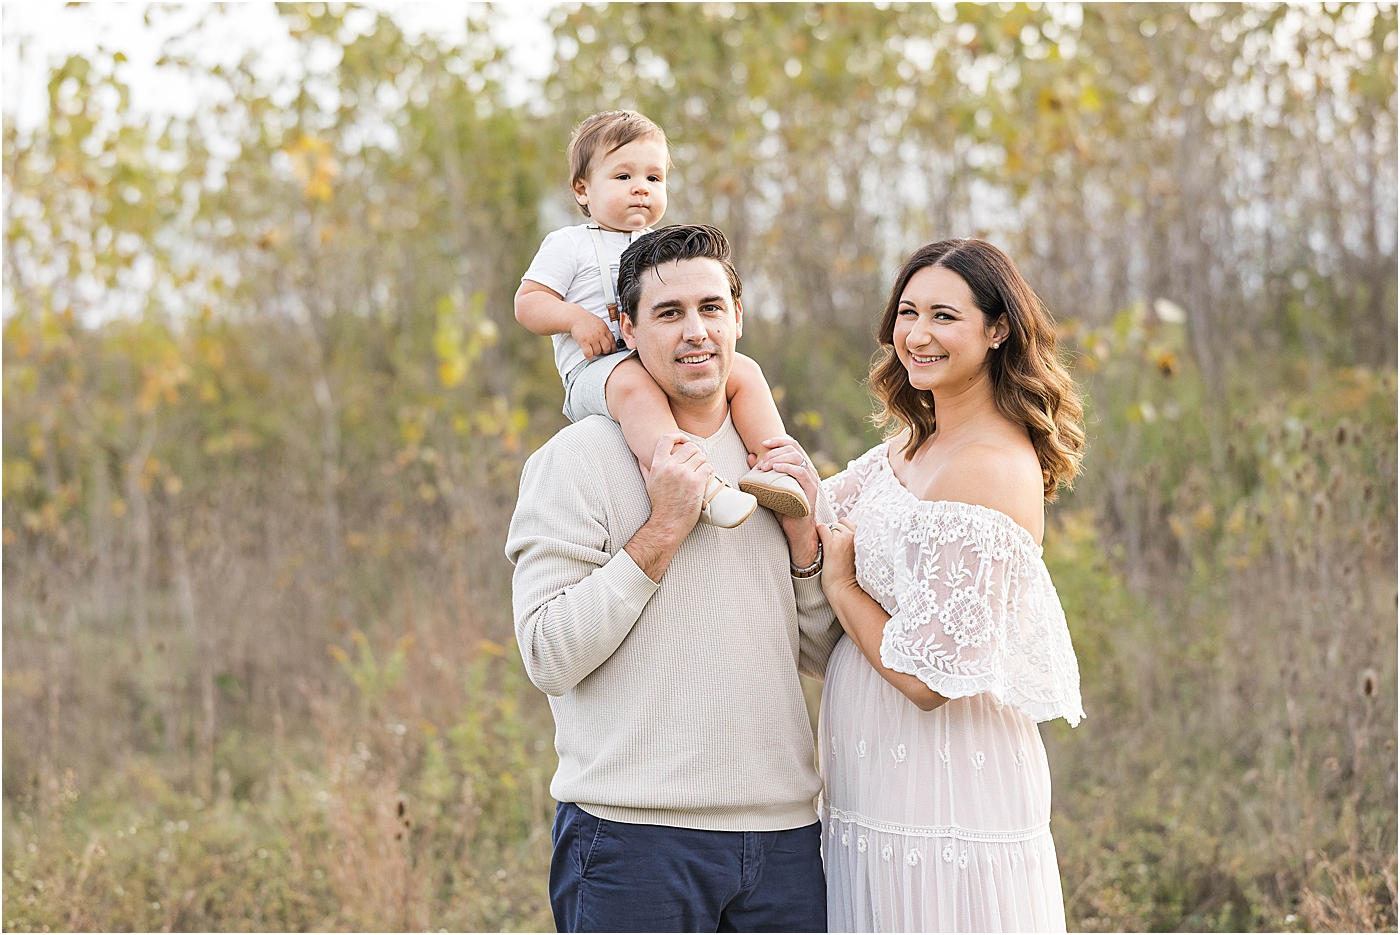 Family photos for sons first birthday session | Photo by Lindsay Konopa Photography